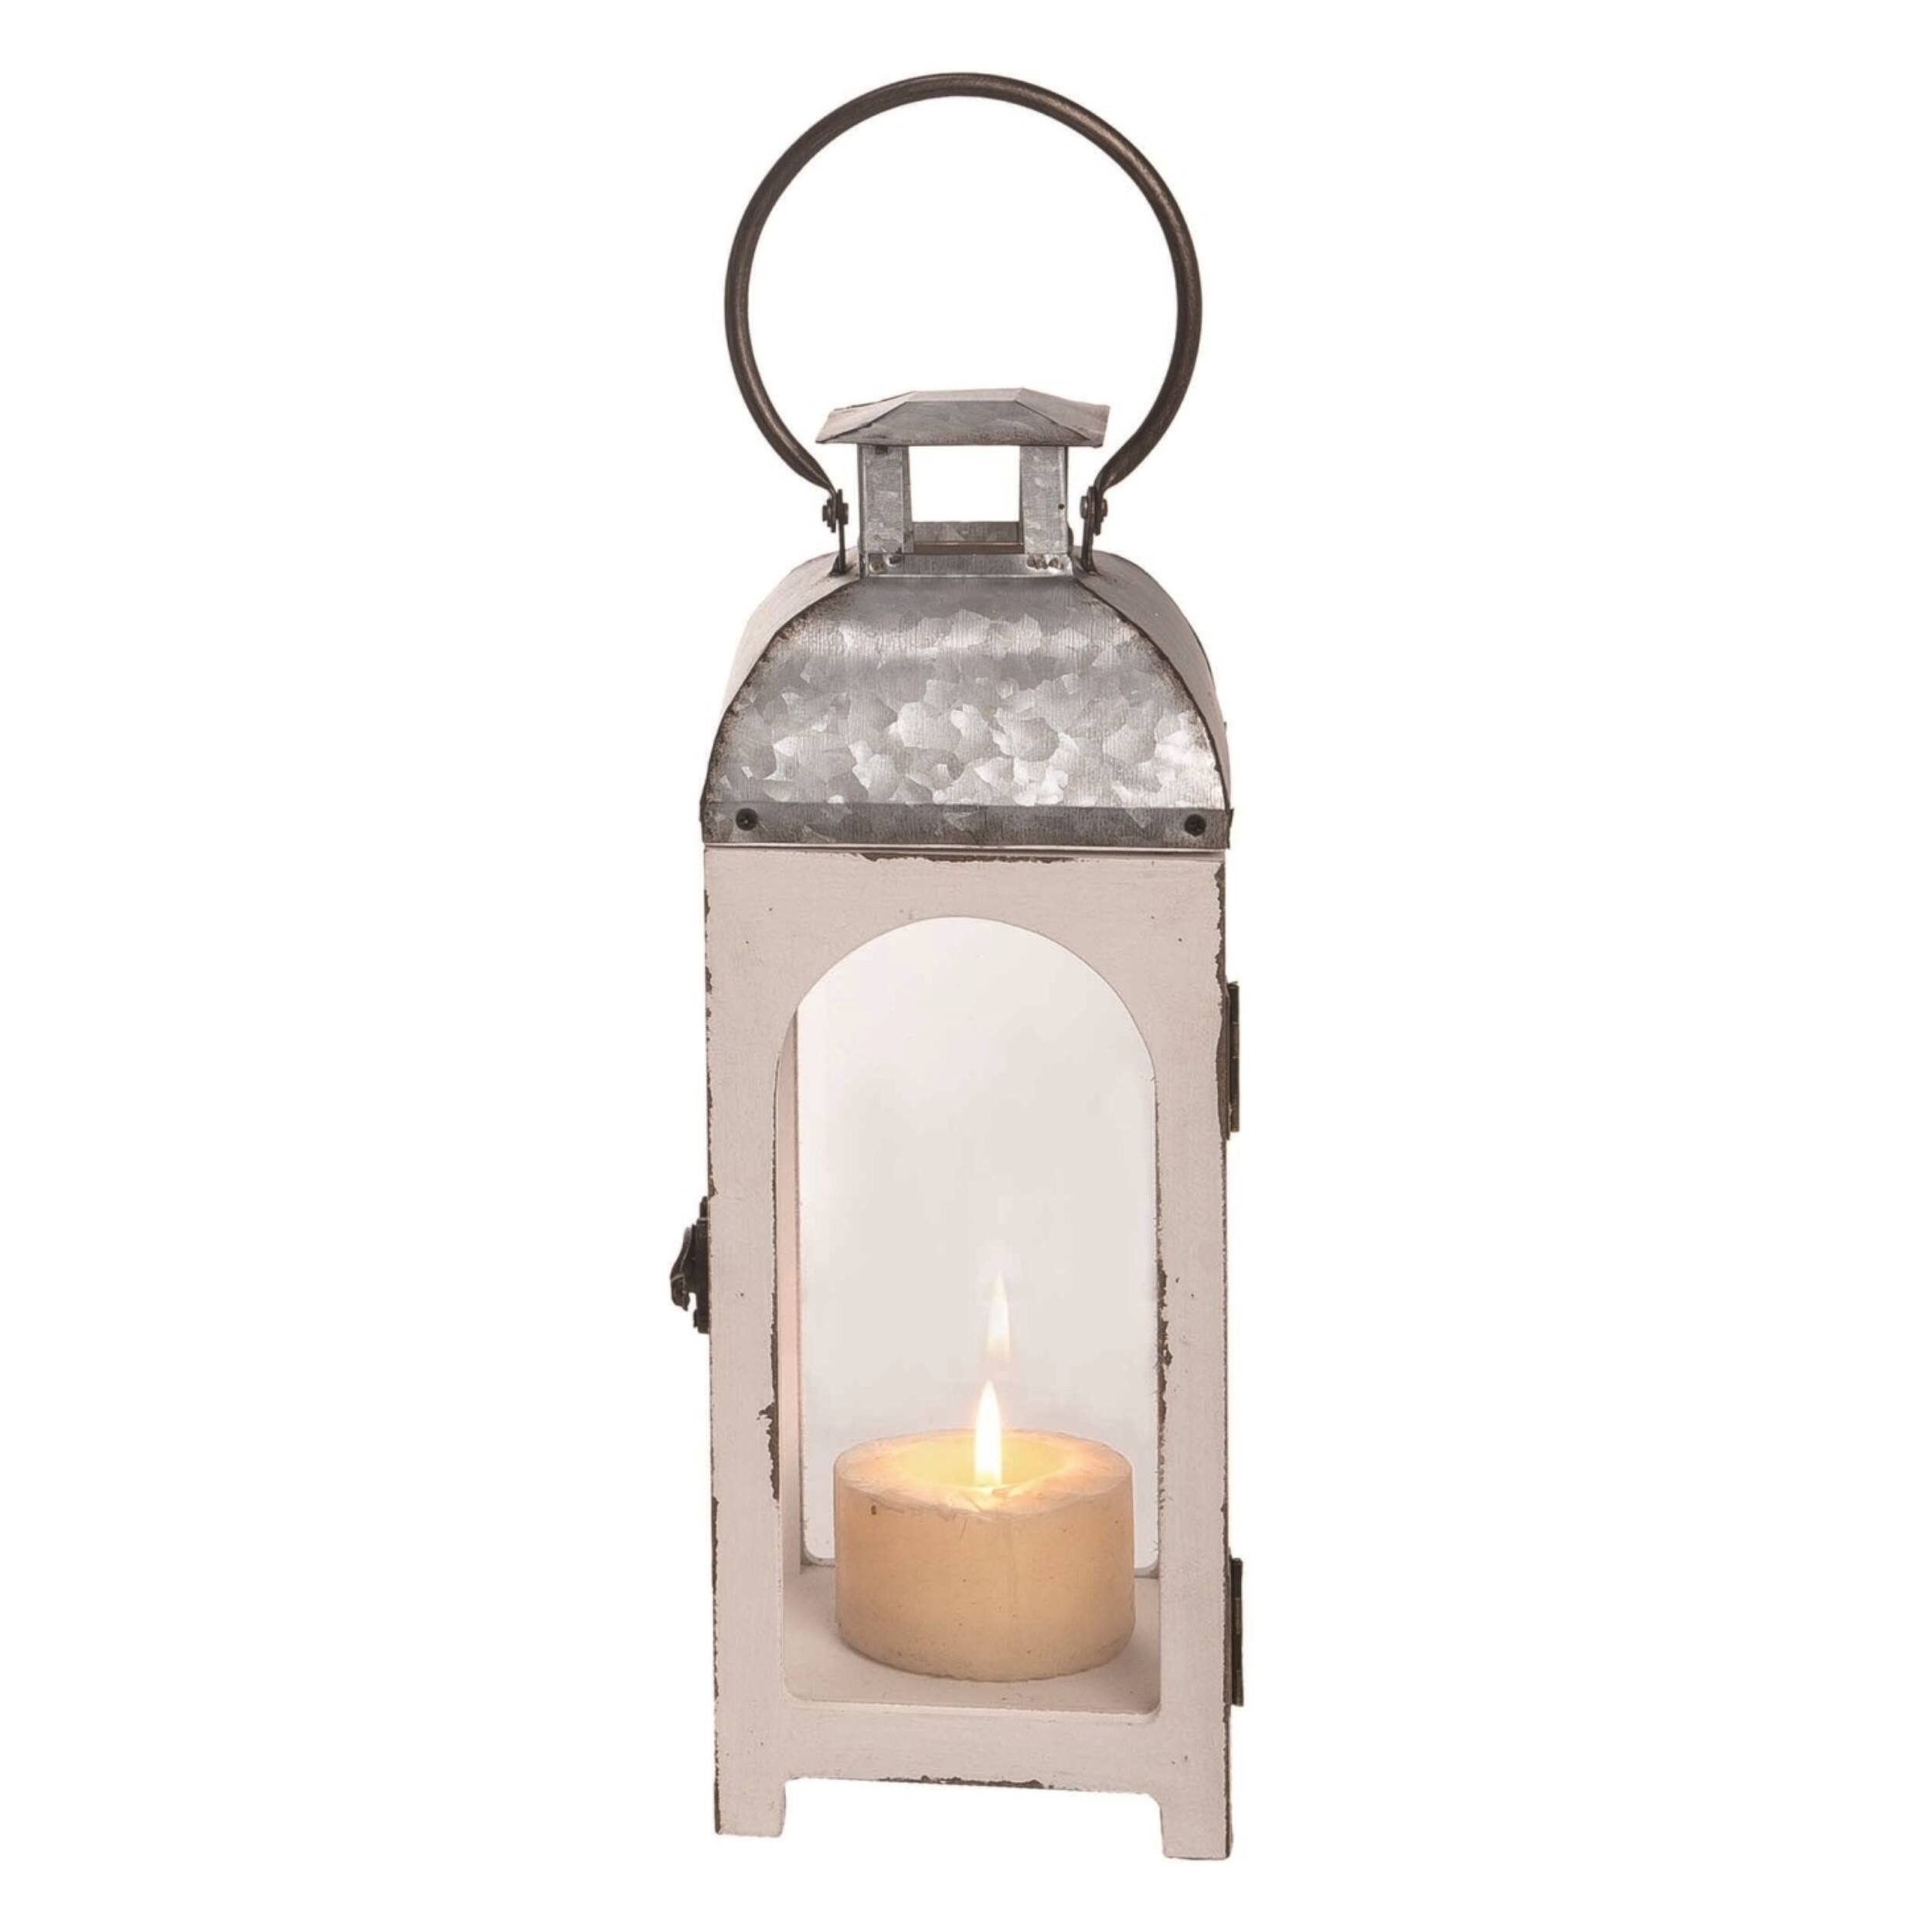 Transpac Wood 13 in. White Spring Classic Lantern Candle Holder (without Candle)